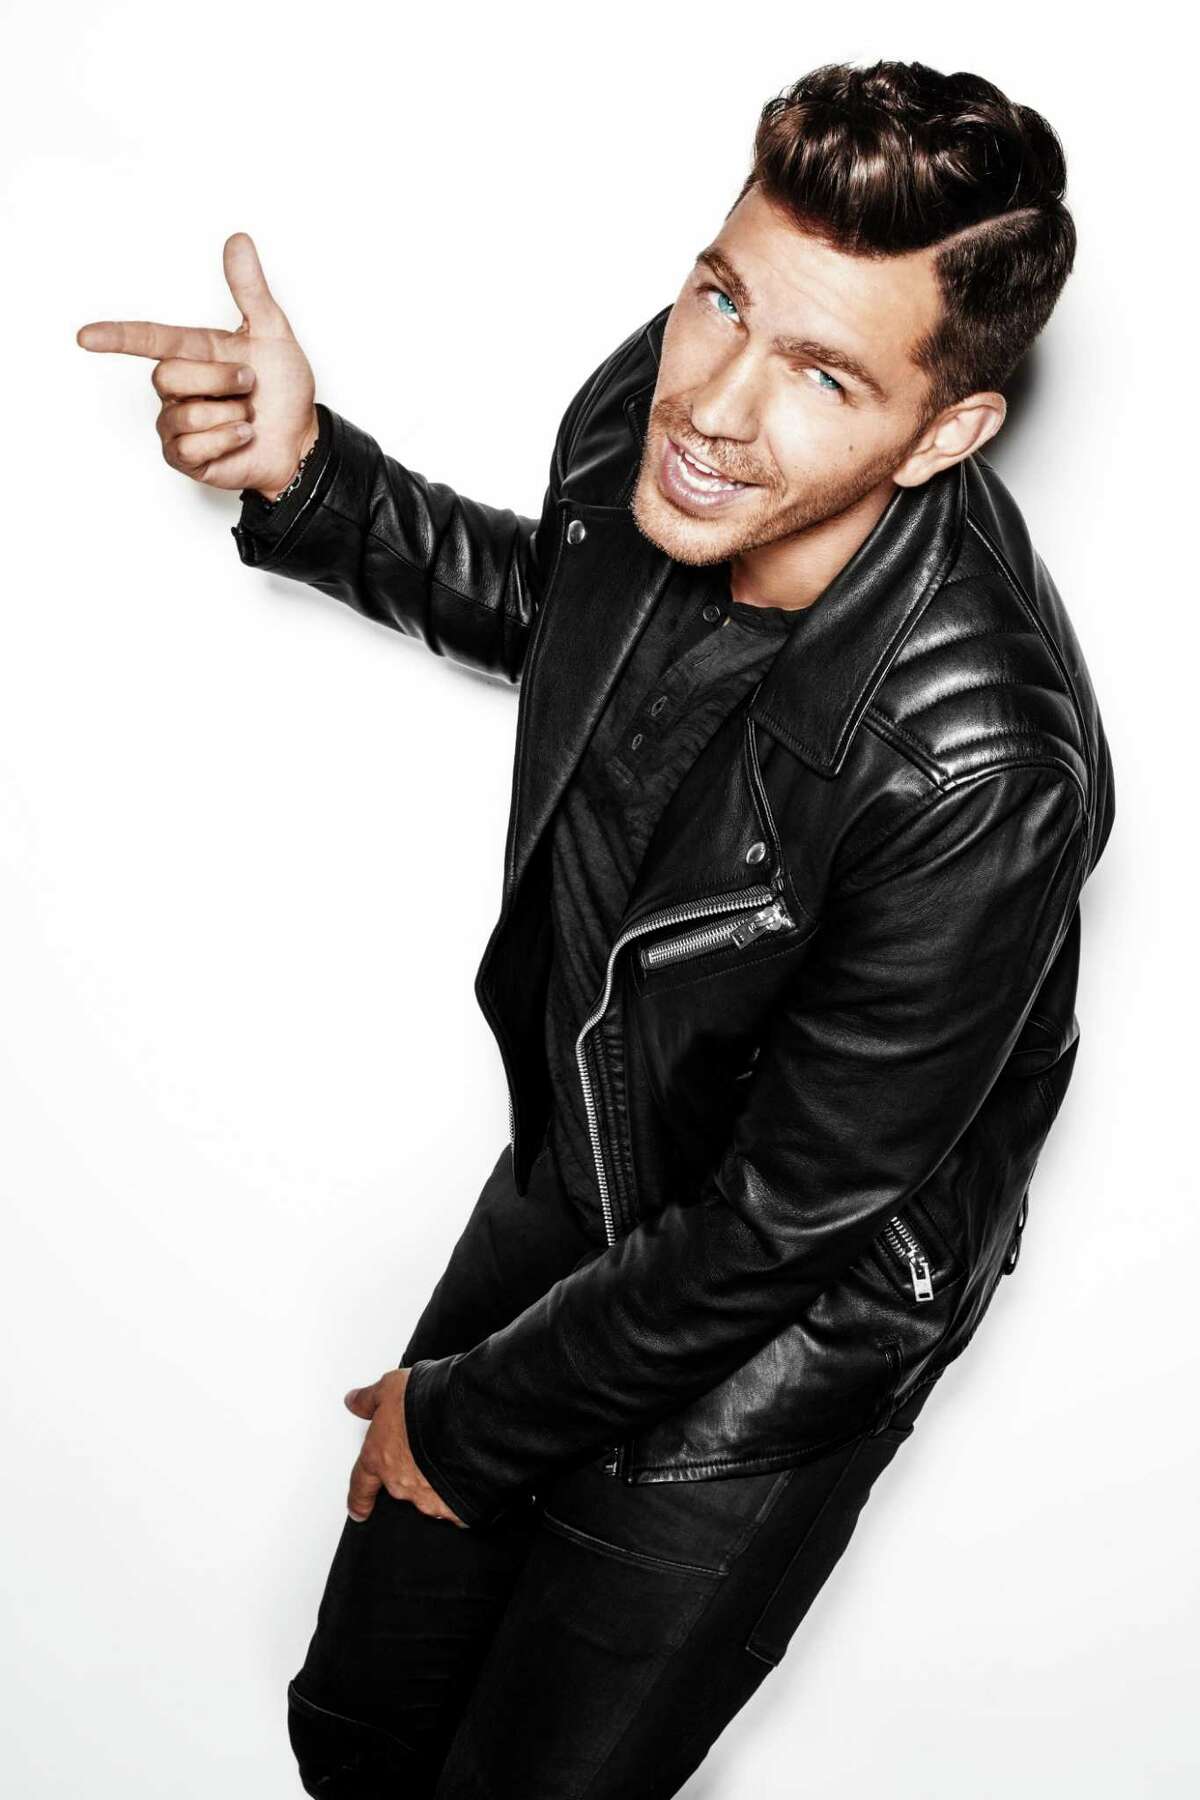 Andy Grammer will perform on Oct. 2 at 8 p.m. at the Ridgefield Playhouse, 80 East Ridge Road, Ridgefield. Tickets are $65-$165. For more information, visit ridgefieldplayhouse.org.